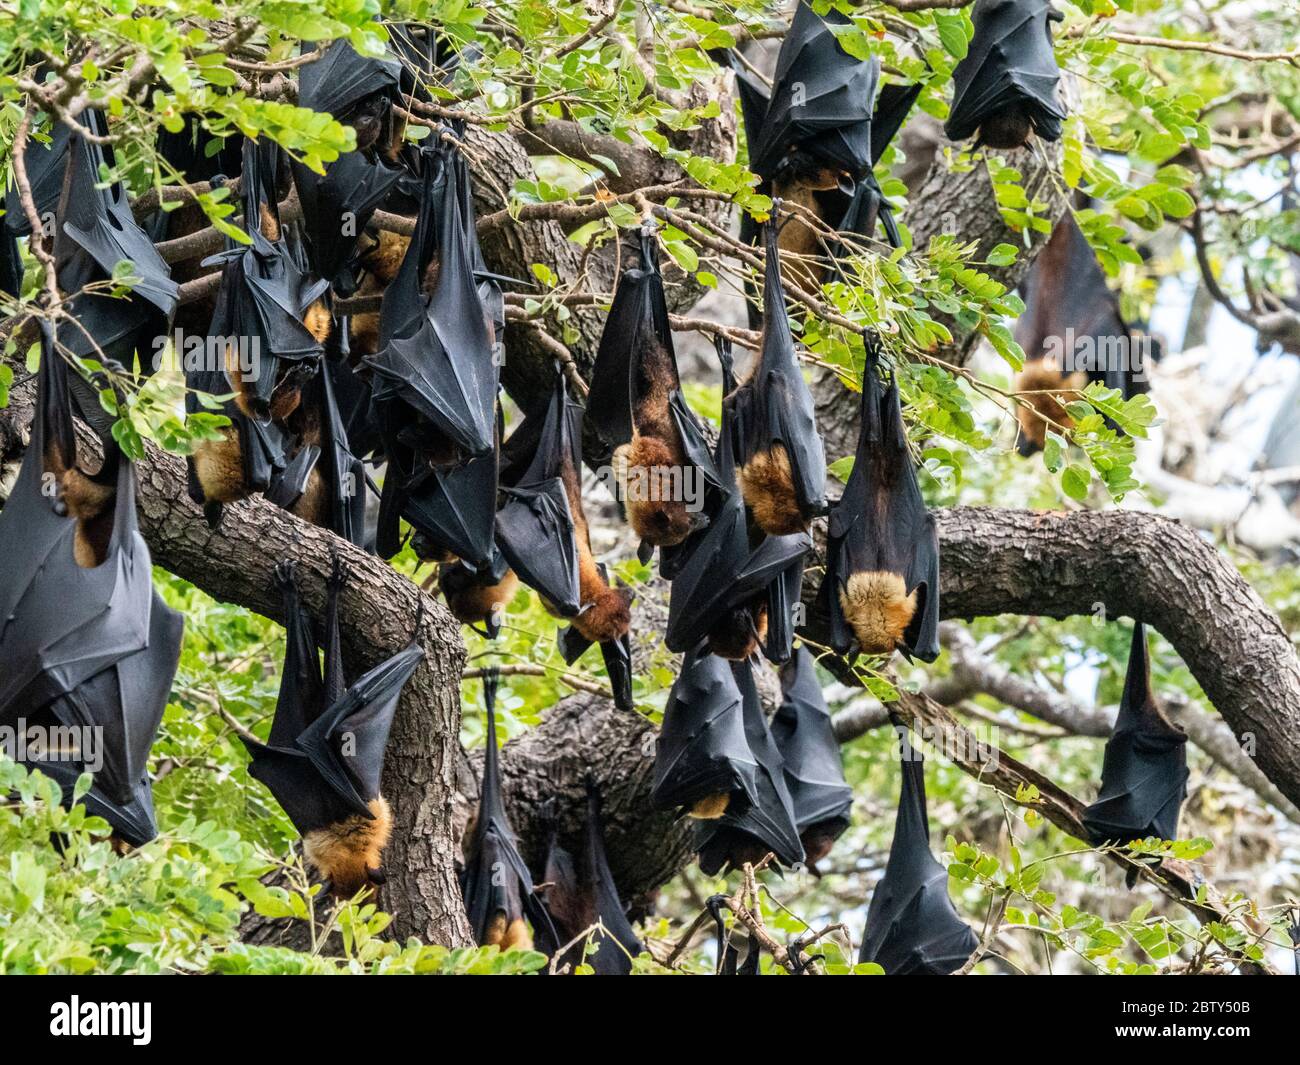 Adult Indian flying foxes (Pteropus medius) roosting during the day near Yala National Park, Sri Lanka, Asia Stock Photo